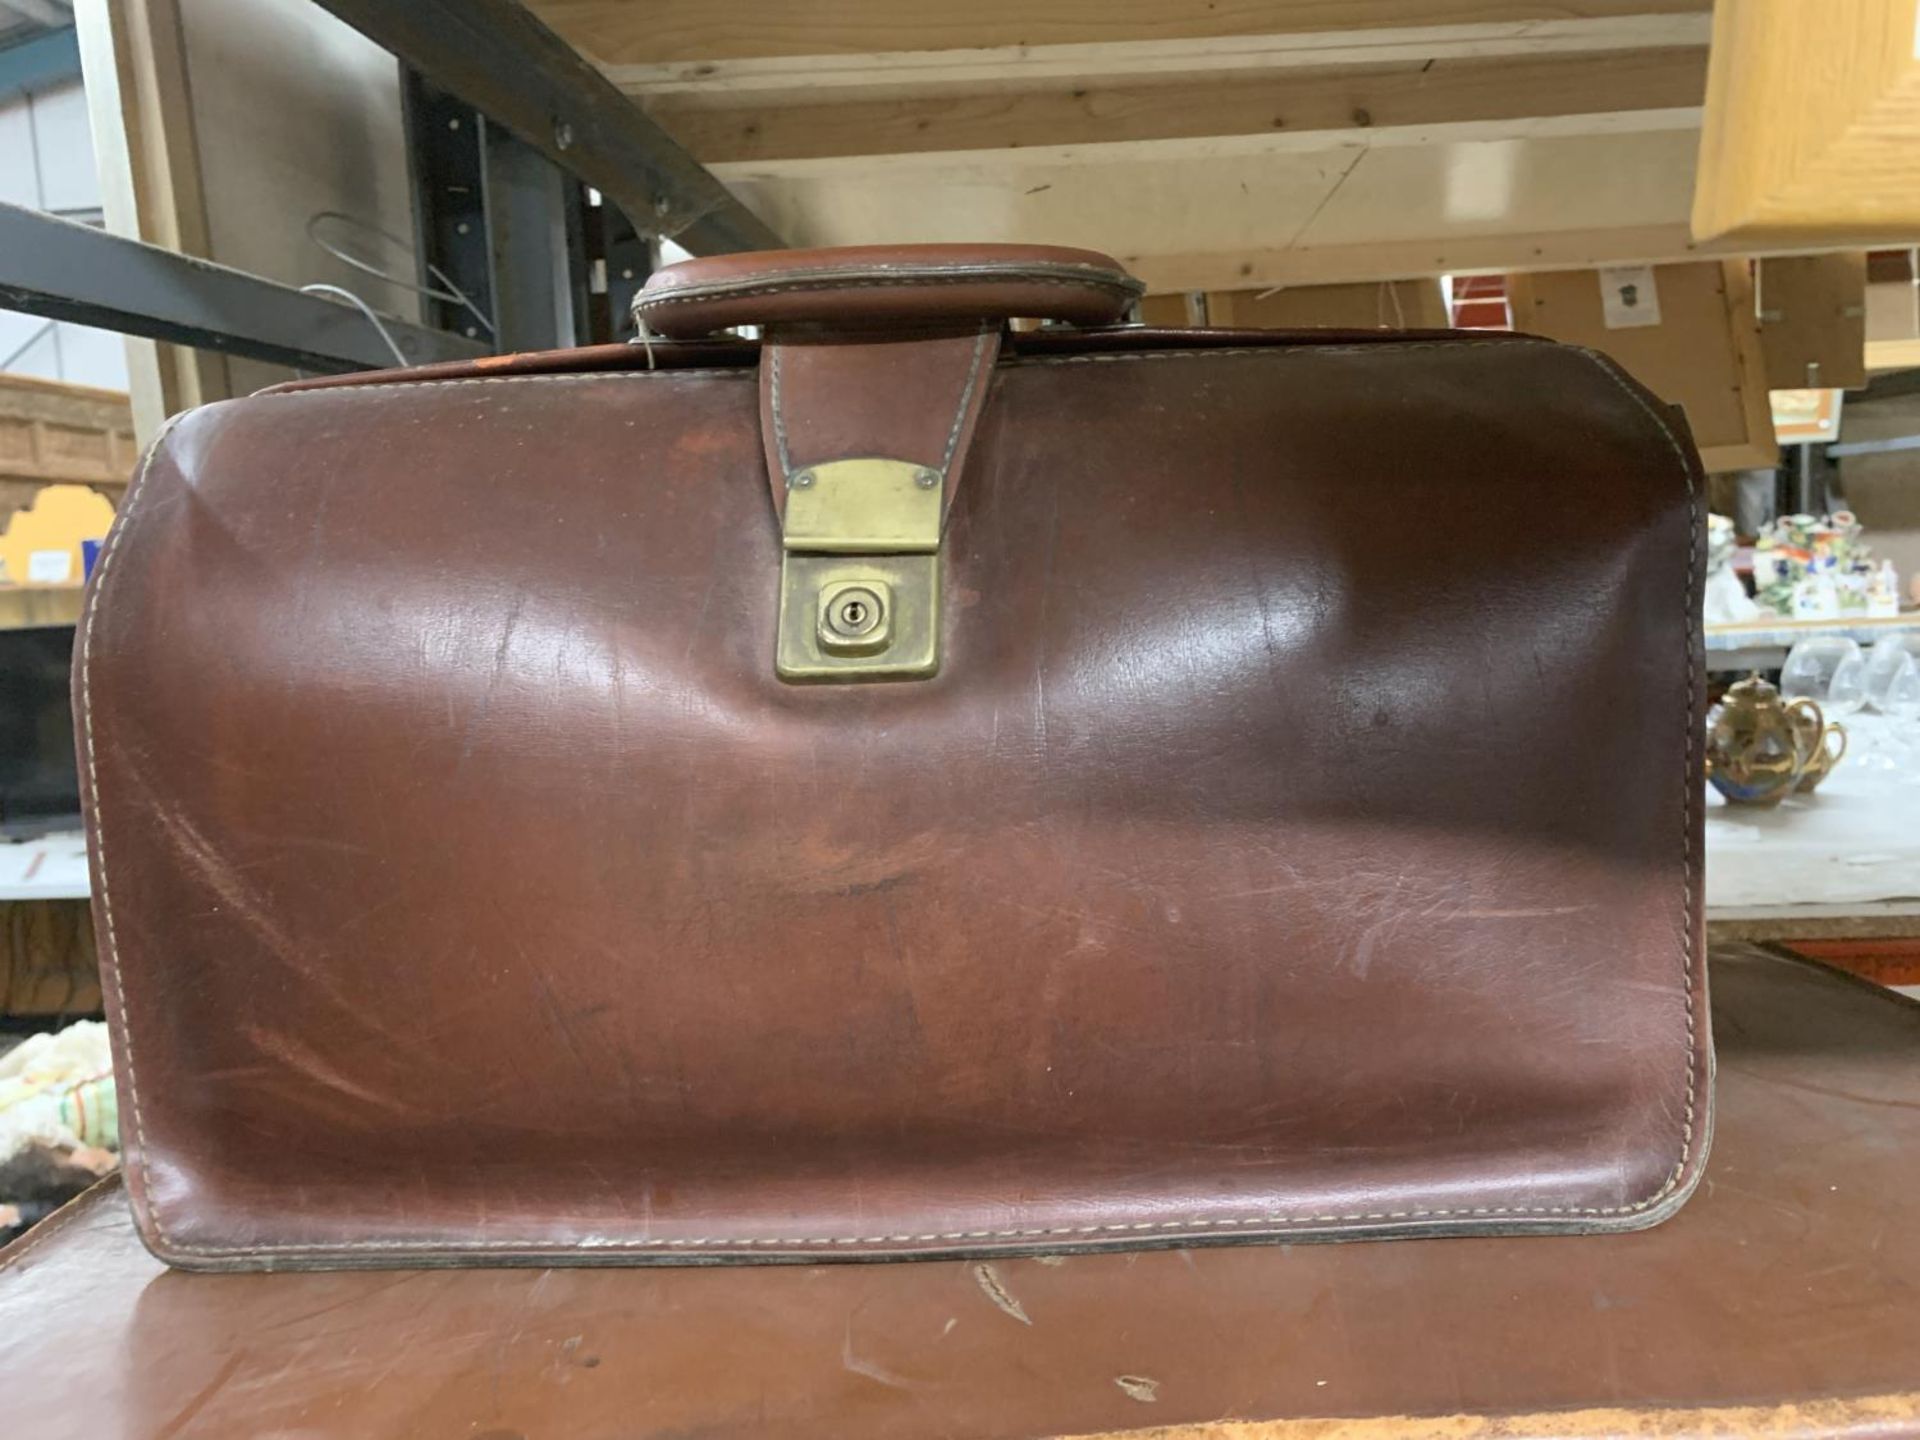 A VINTAGE LEATHER SUITCASE WITH A CANADIAN PACIFIC RAILWAY LABEL PLUS A VINTAGE LEATHER BRIEFCASE - Image 2 of 5